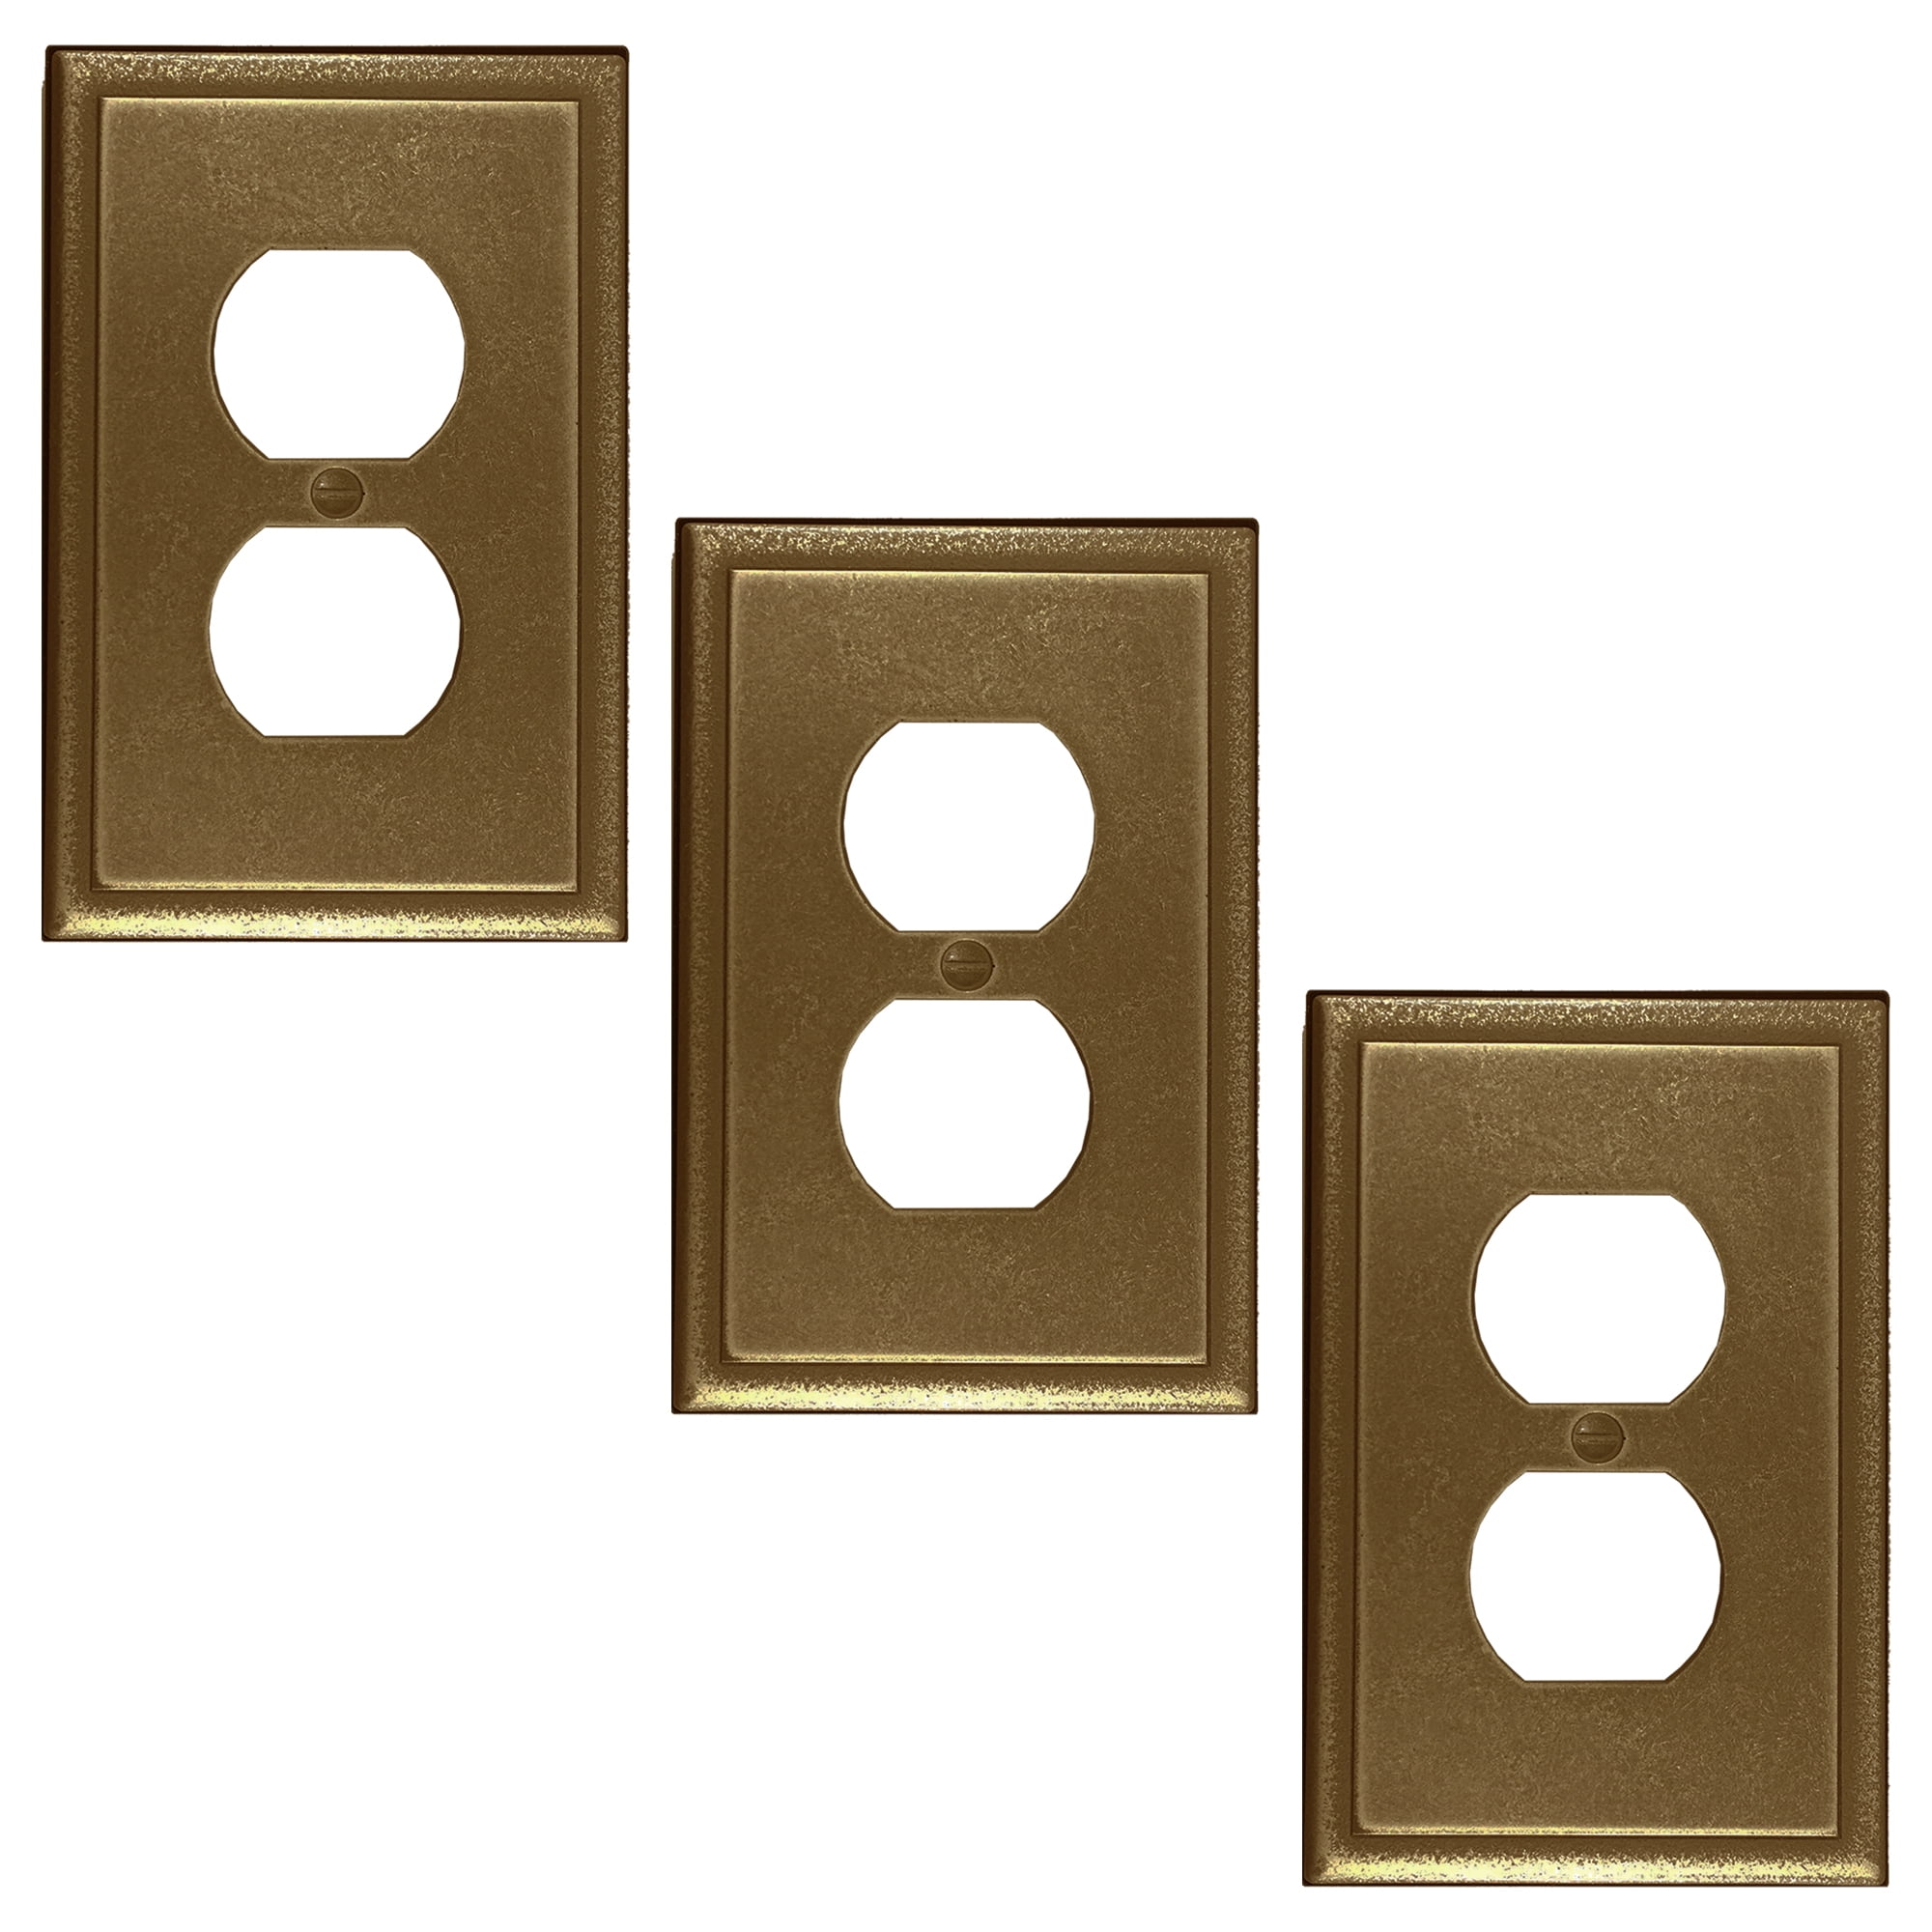 Questech Single Duplex Gold Outlet Cover Ambient Decorative Electrical Wall Plate 